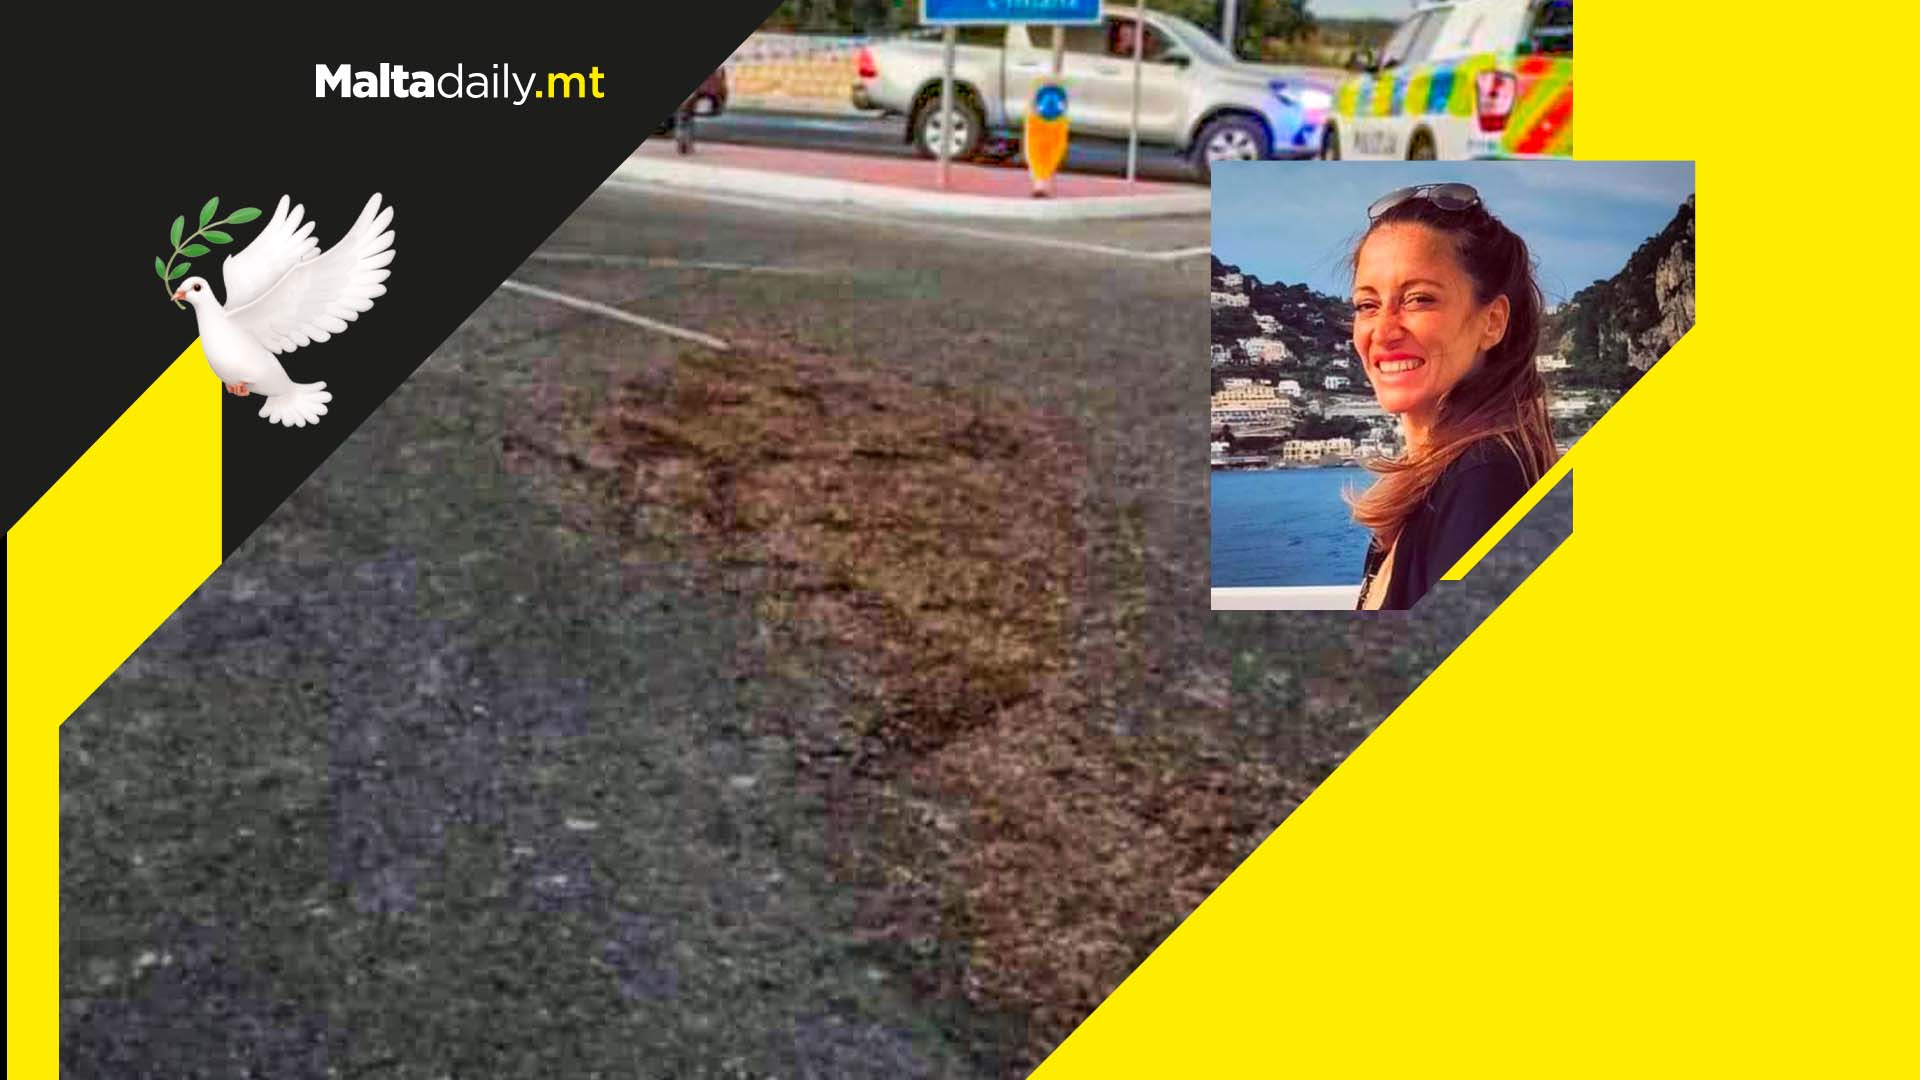 Slippery oily material left on road likely cause of Marie Claire Lombardi’s death